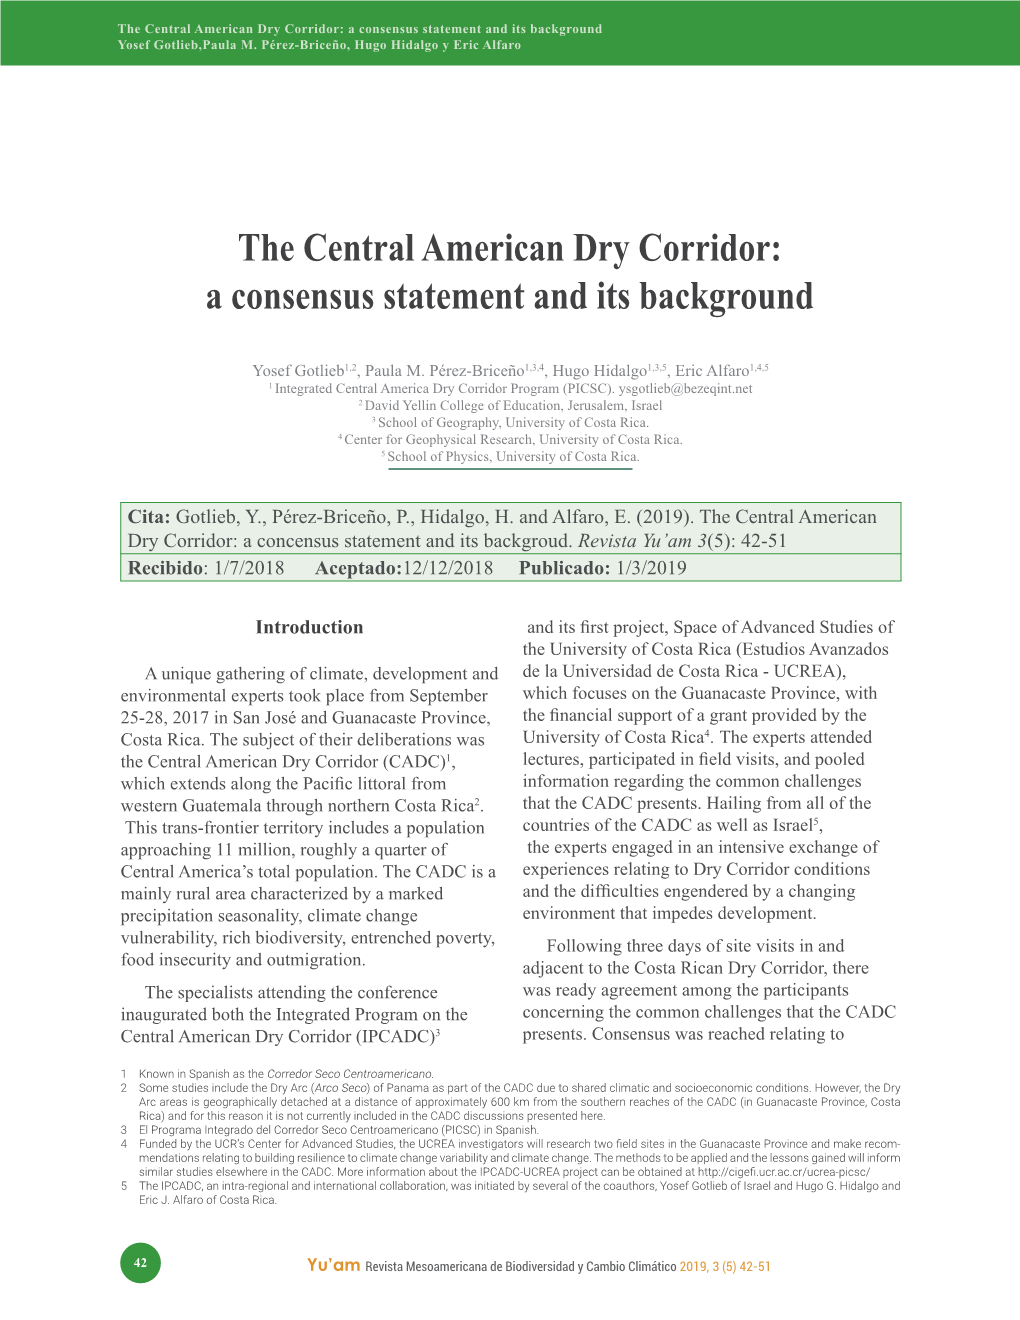 The Central American Dry Corridor: a Consensus Statement and Its Background Yosef Gotlieb,Paula M